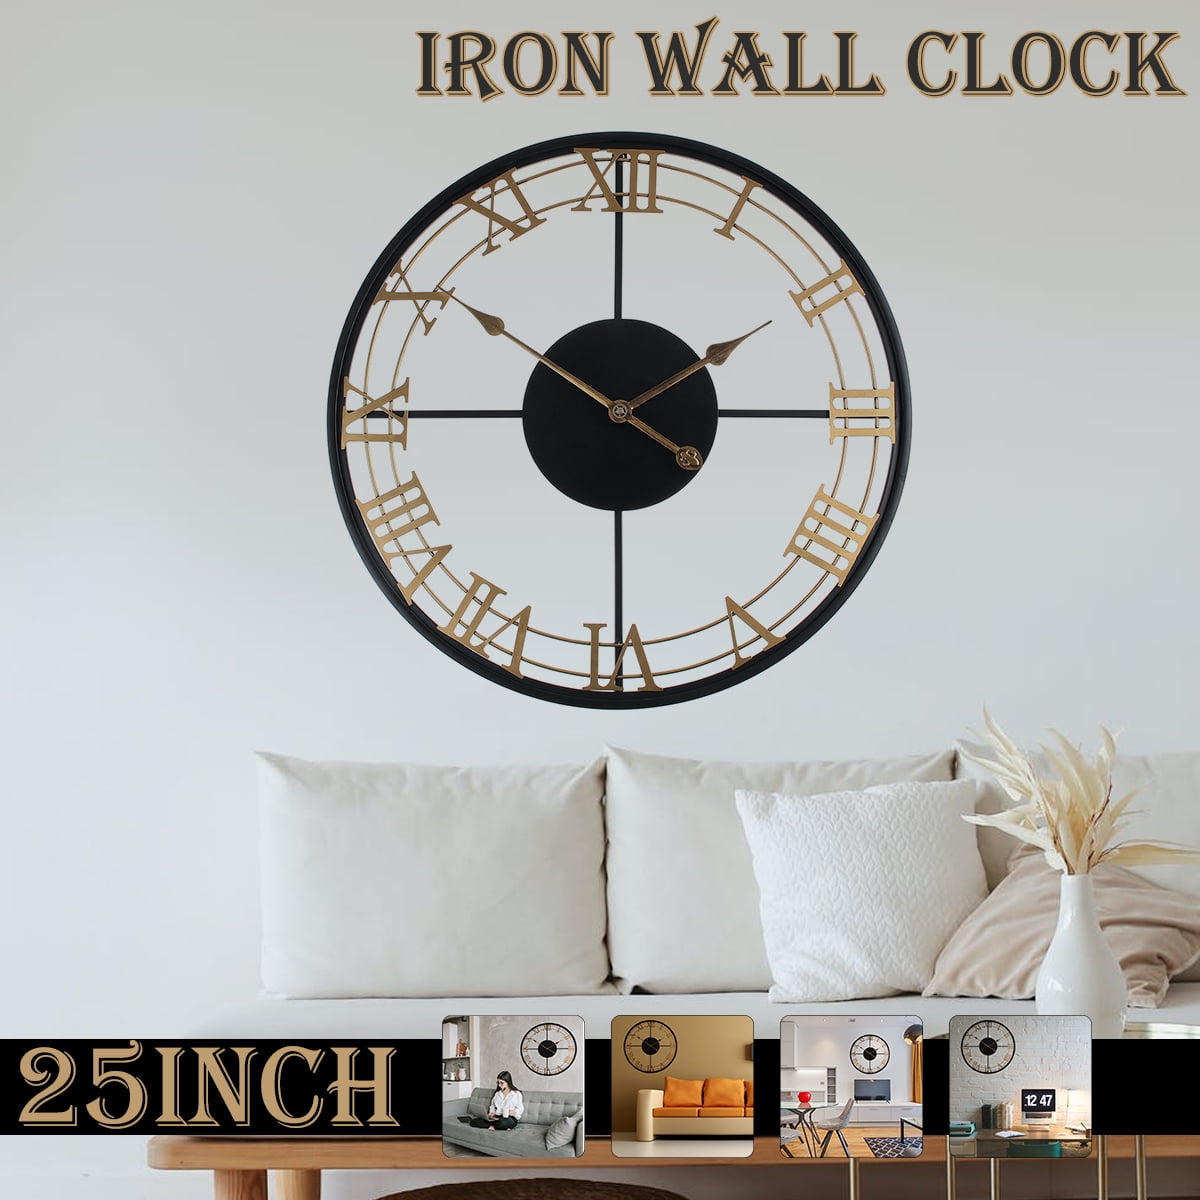 New Hometime Square Wooden Wall Clock Abilene Wall Clock RRP £25.99 OFFER 